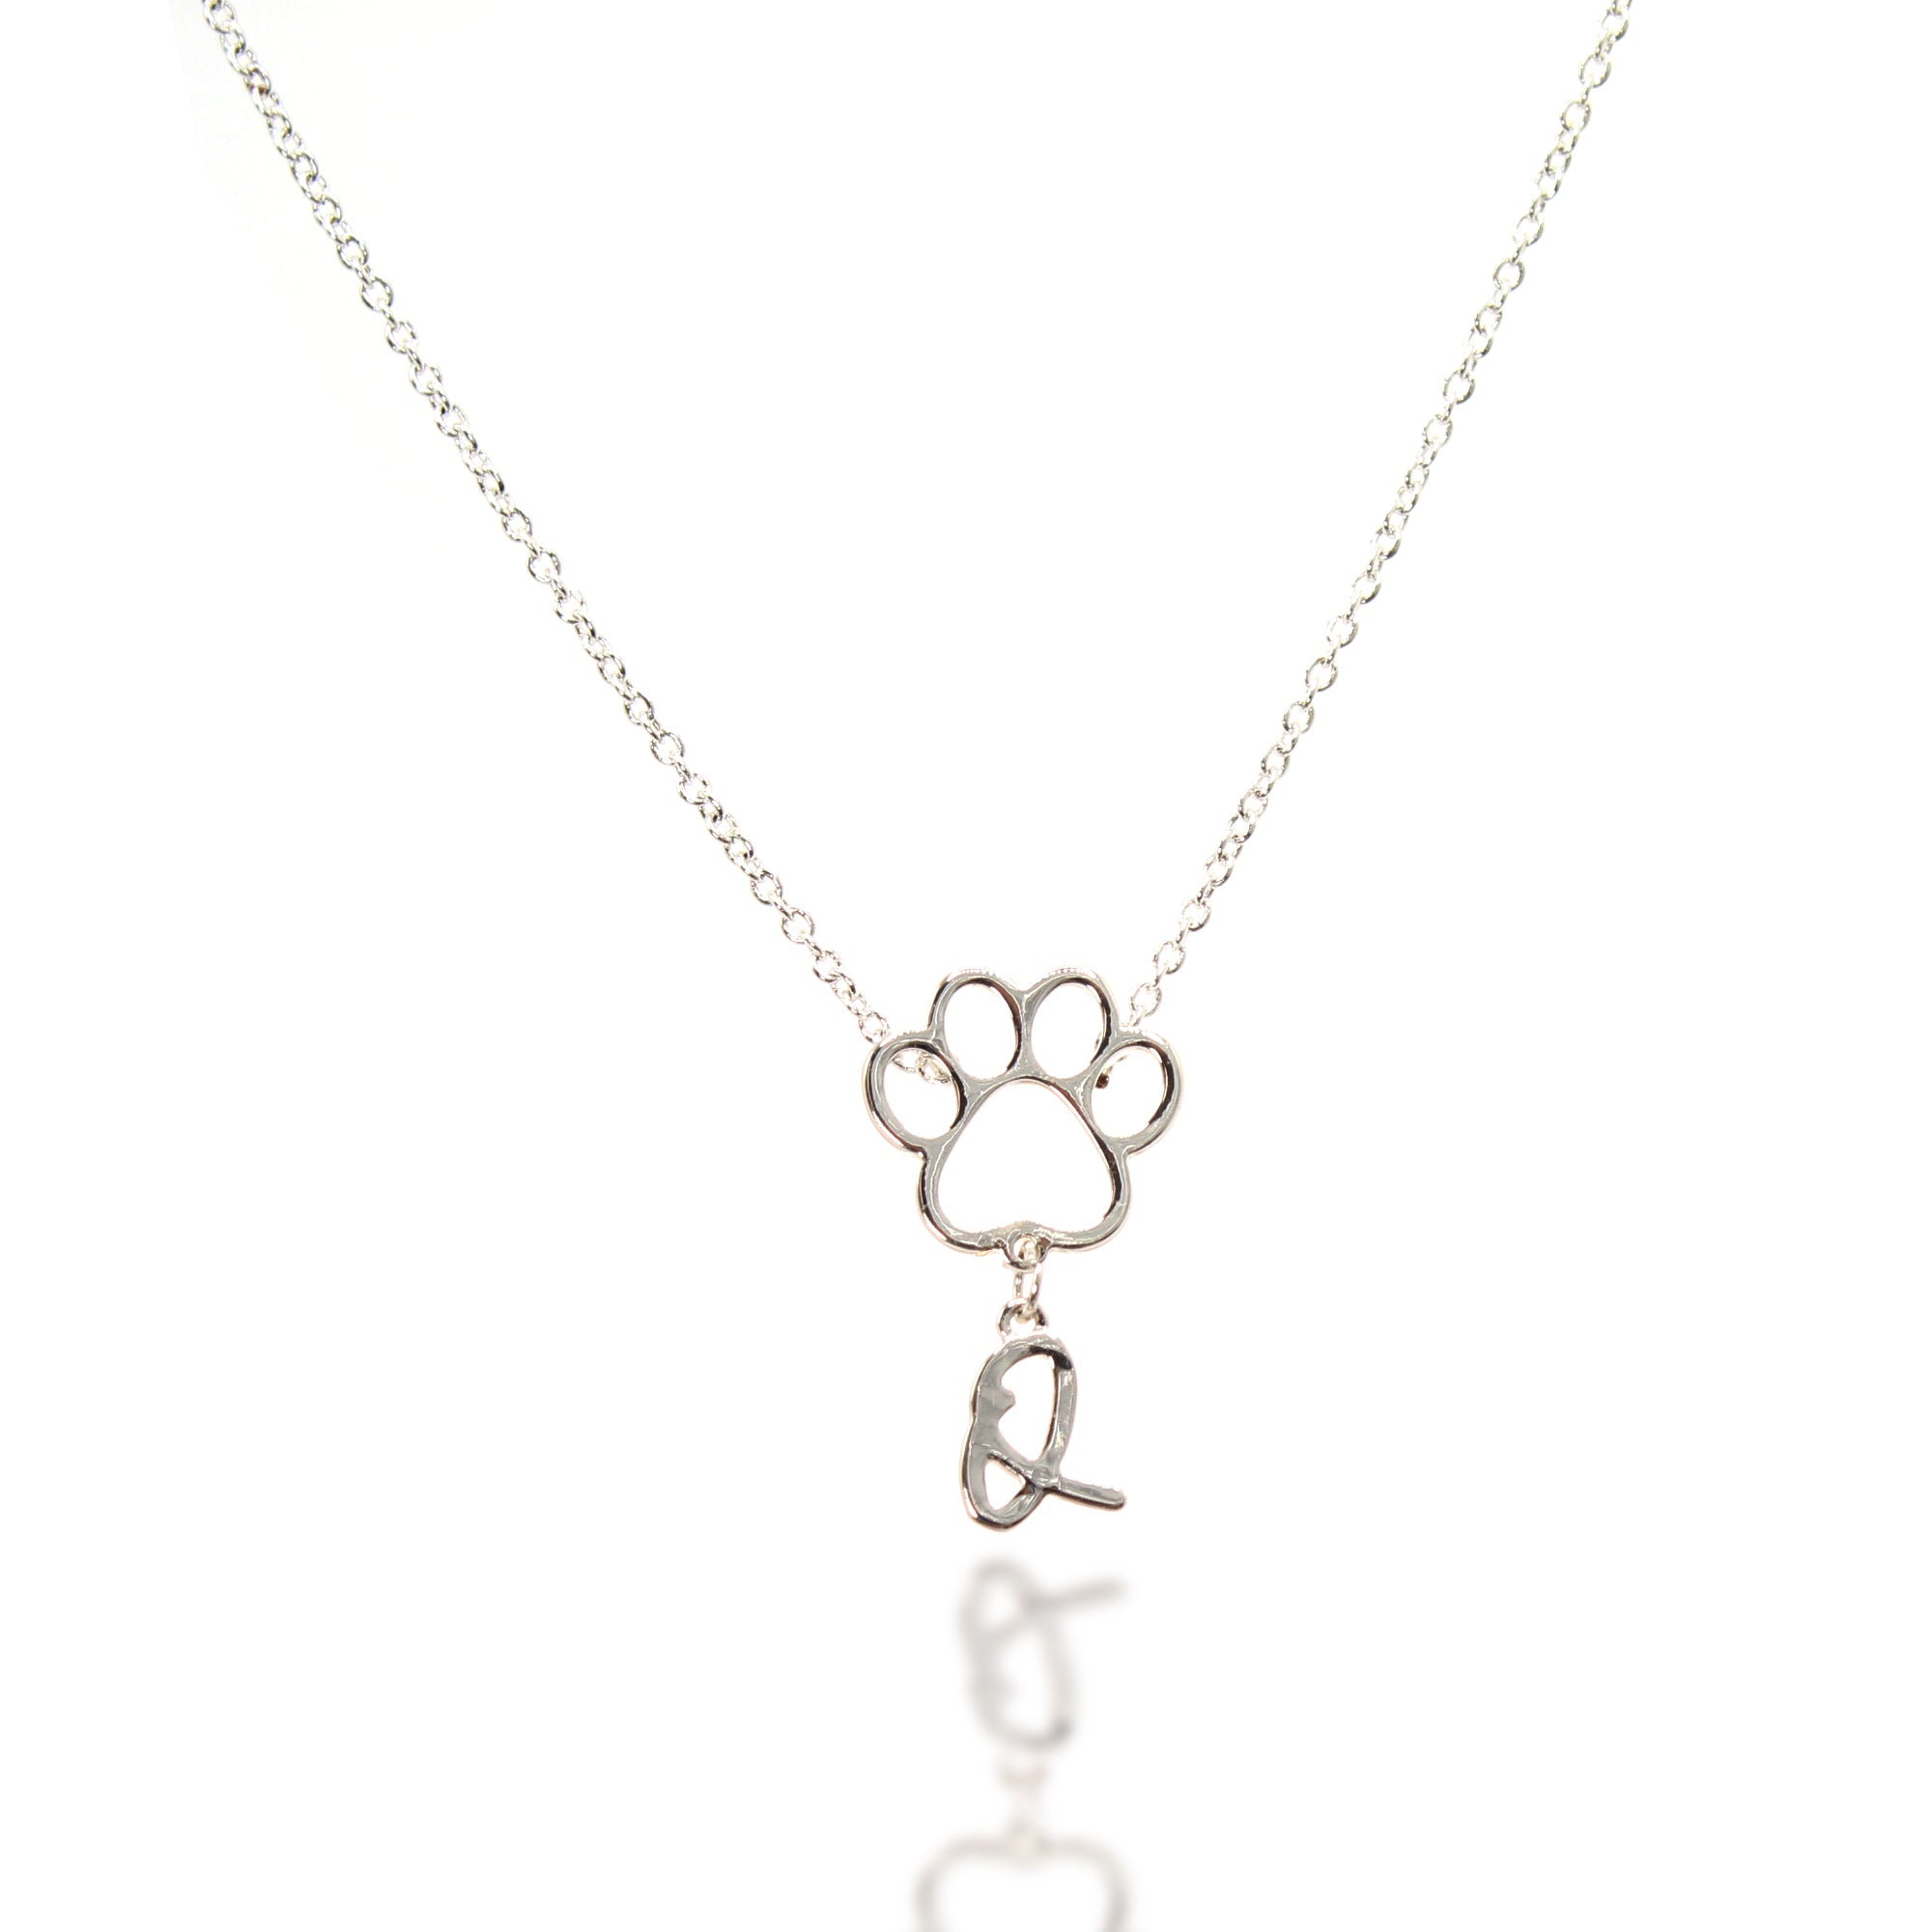 Personalized Paw Initial Letter Necklace - Silver